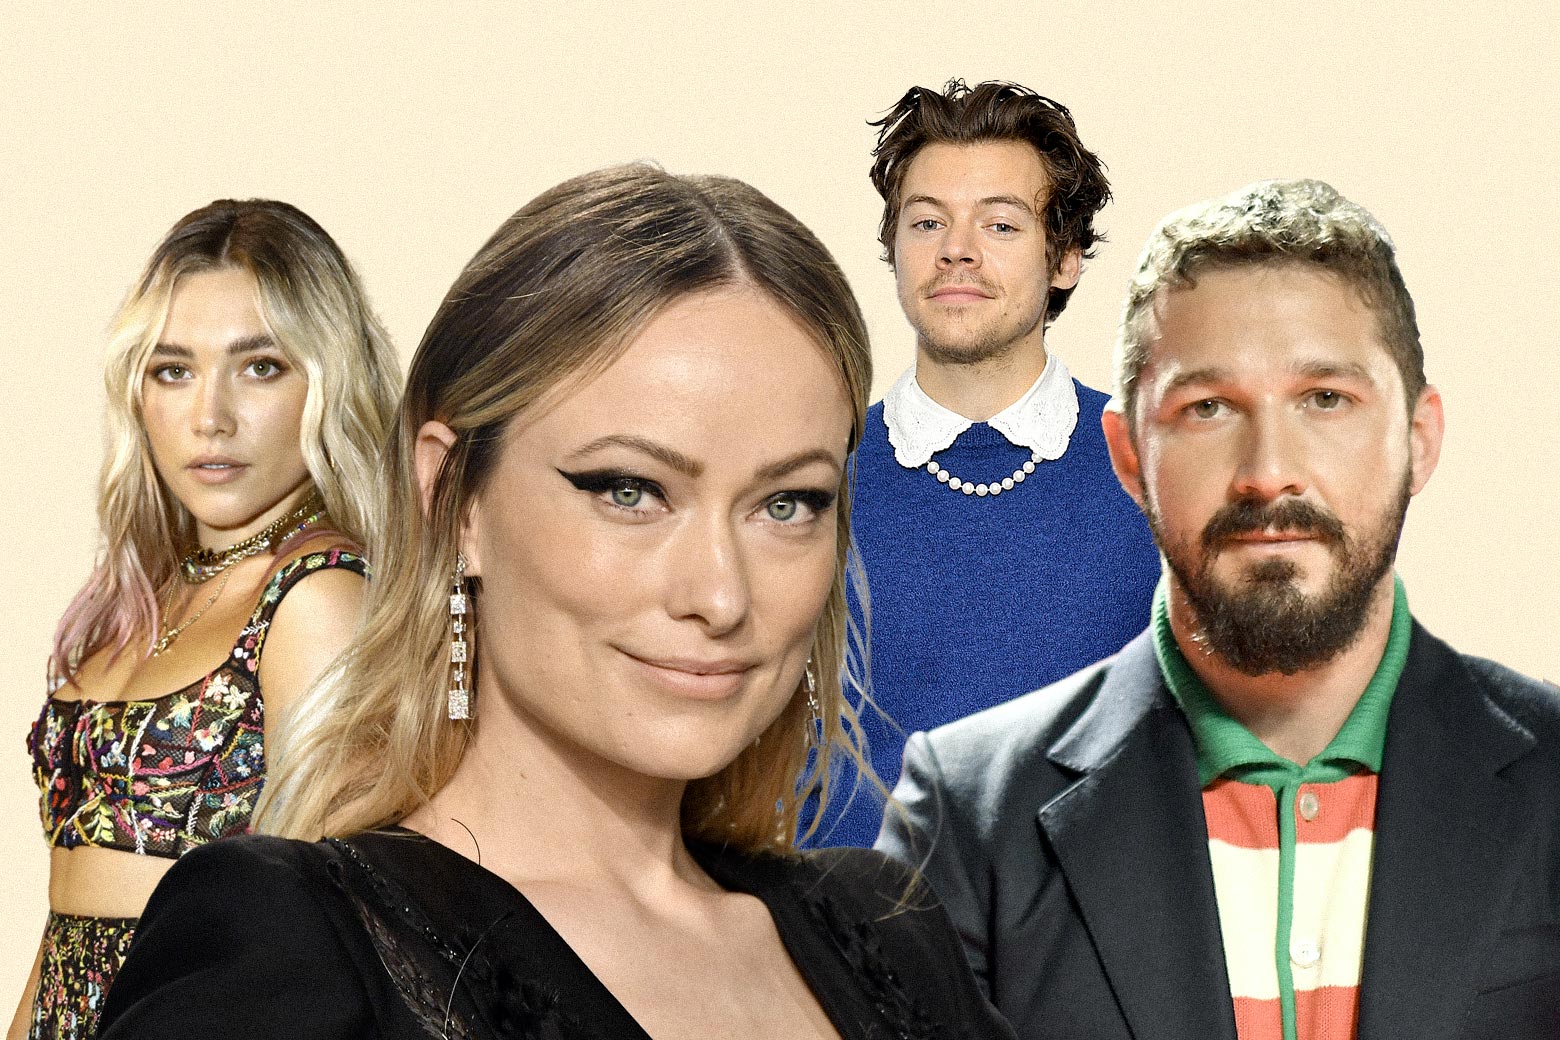 Florence Pugh, Olivia Wilde, Harry Styles, and Shia LaBeouf.